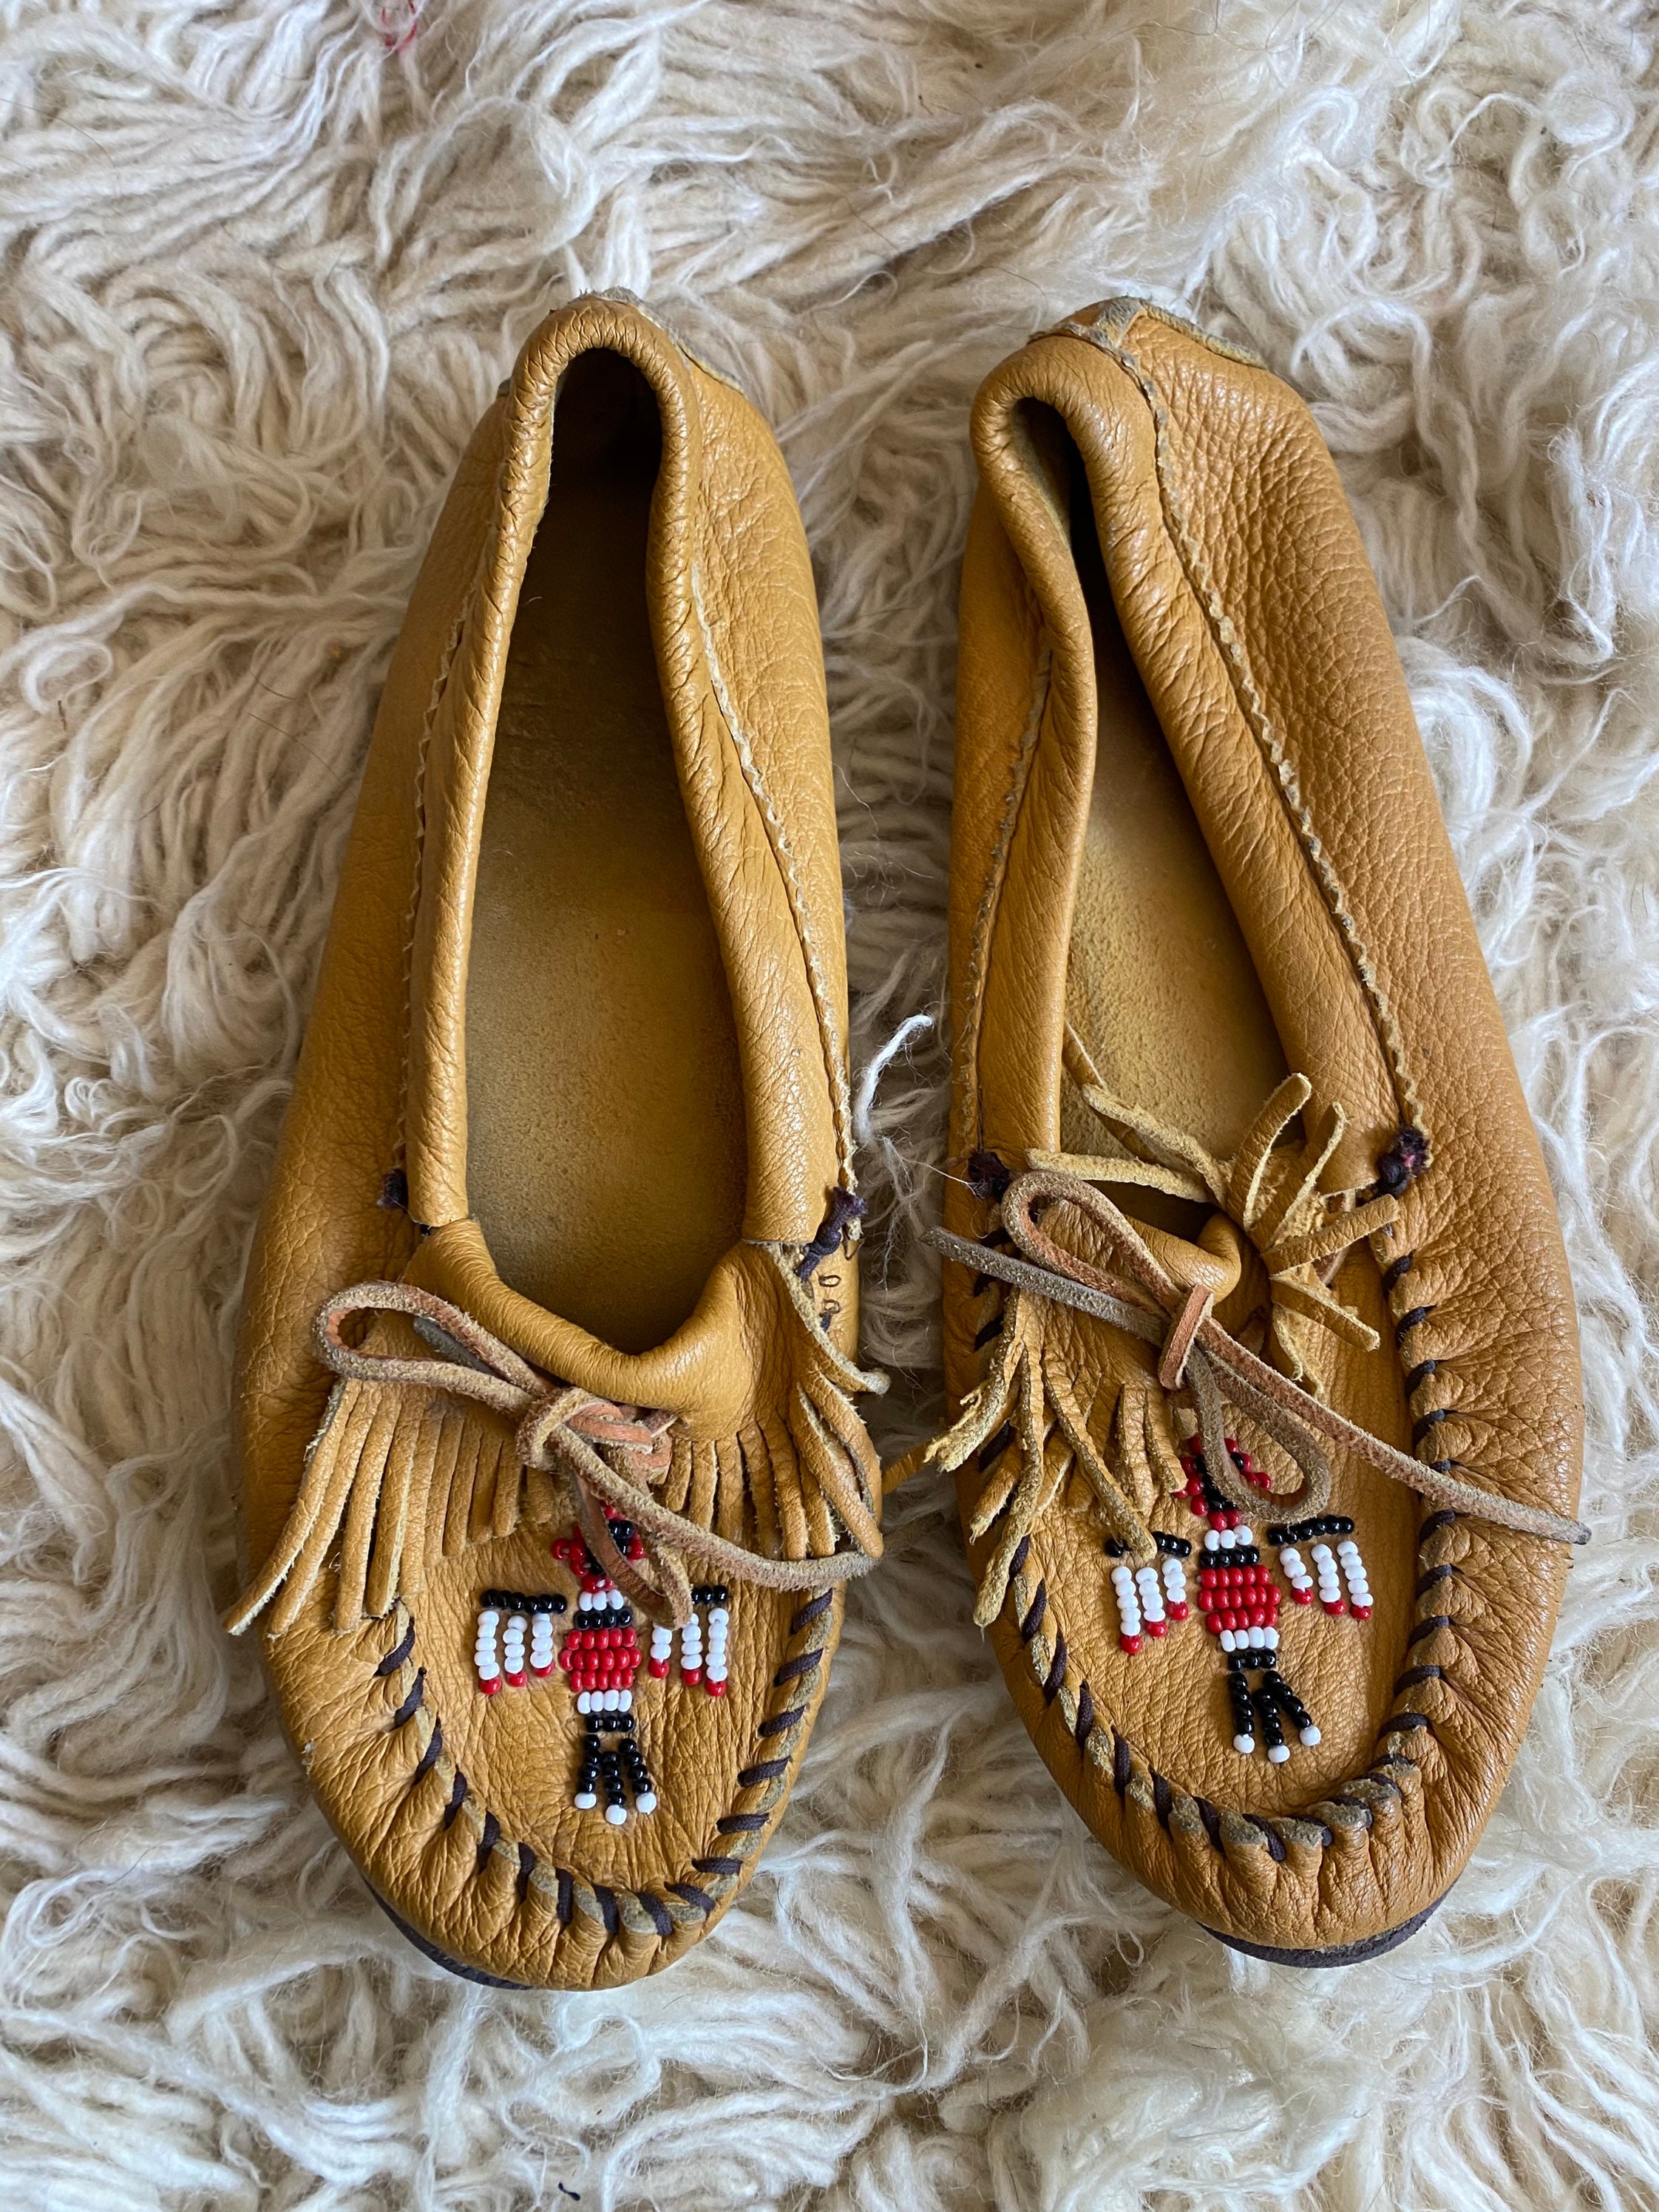 Koopje toon Email Buy Vintage 7 US Minnetonka Moccasin Shoes Slippers Womens Beaded Online in  India - Etsy